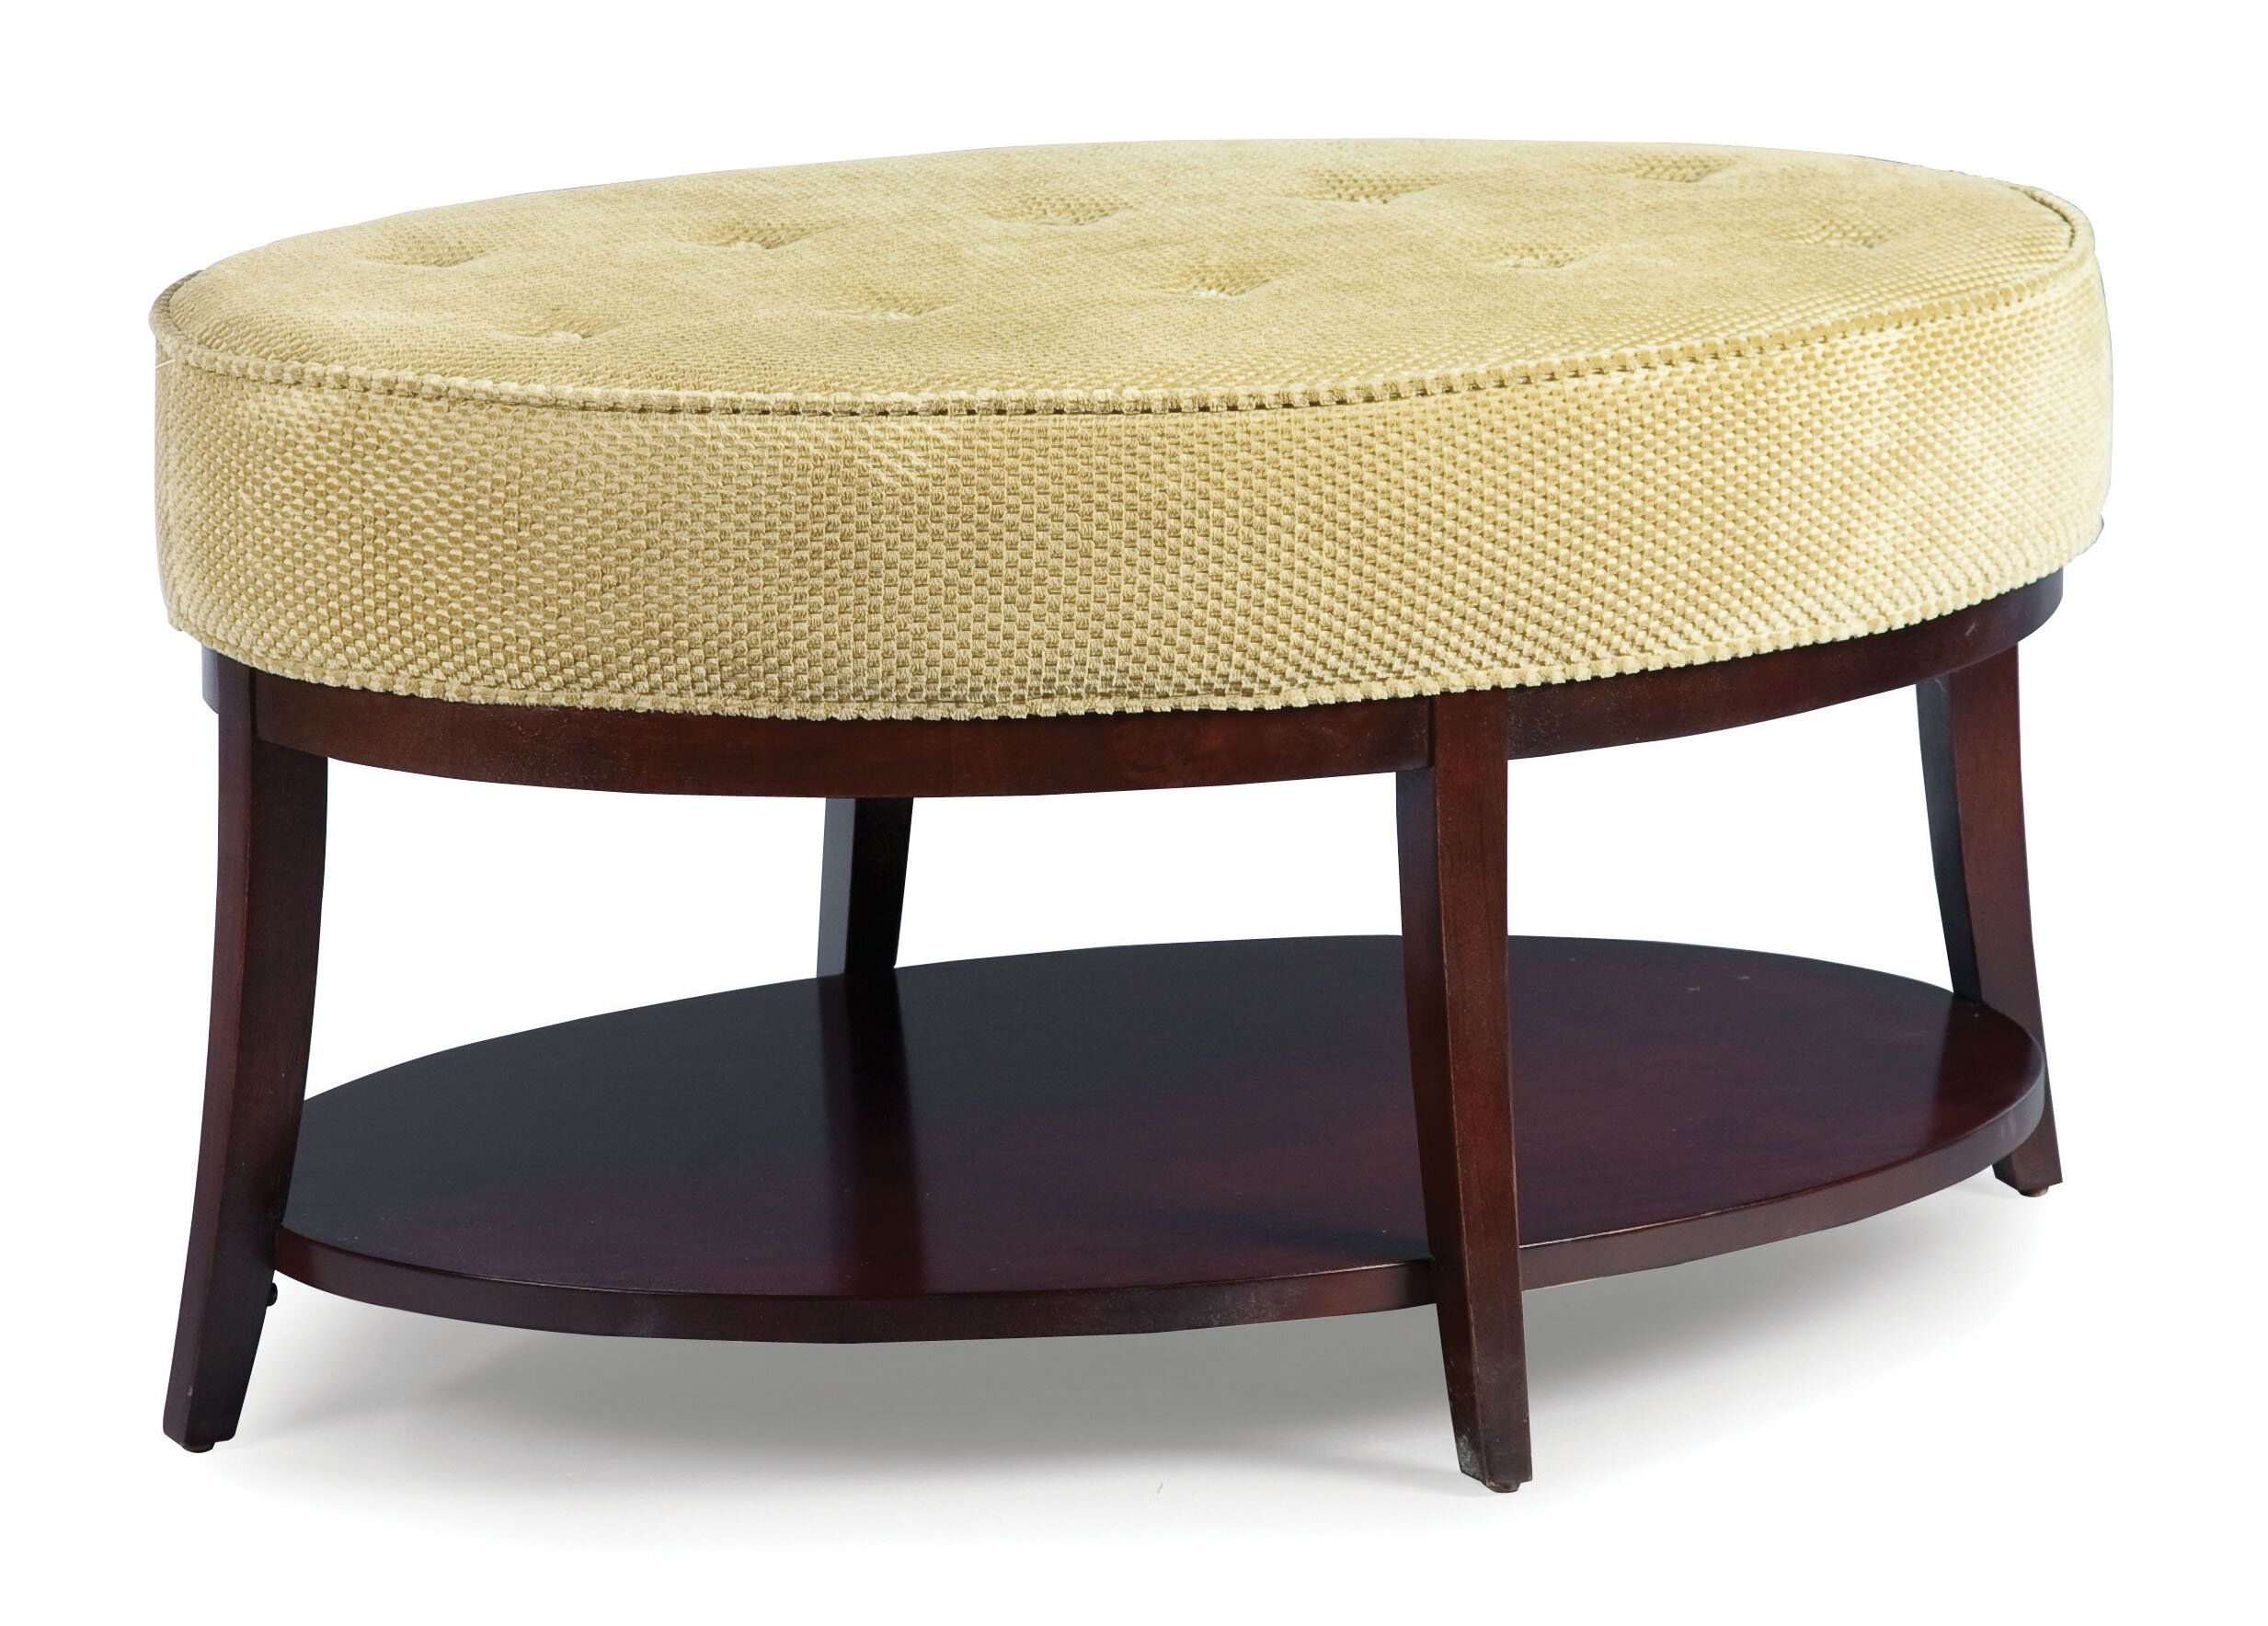 Fairfield Chair Stonewood Tufted Cocktail Ottoman | Wayfair Regarding Gray Tufted Cocktail Ottomans (View 18 of 20)